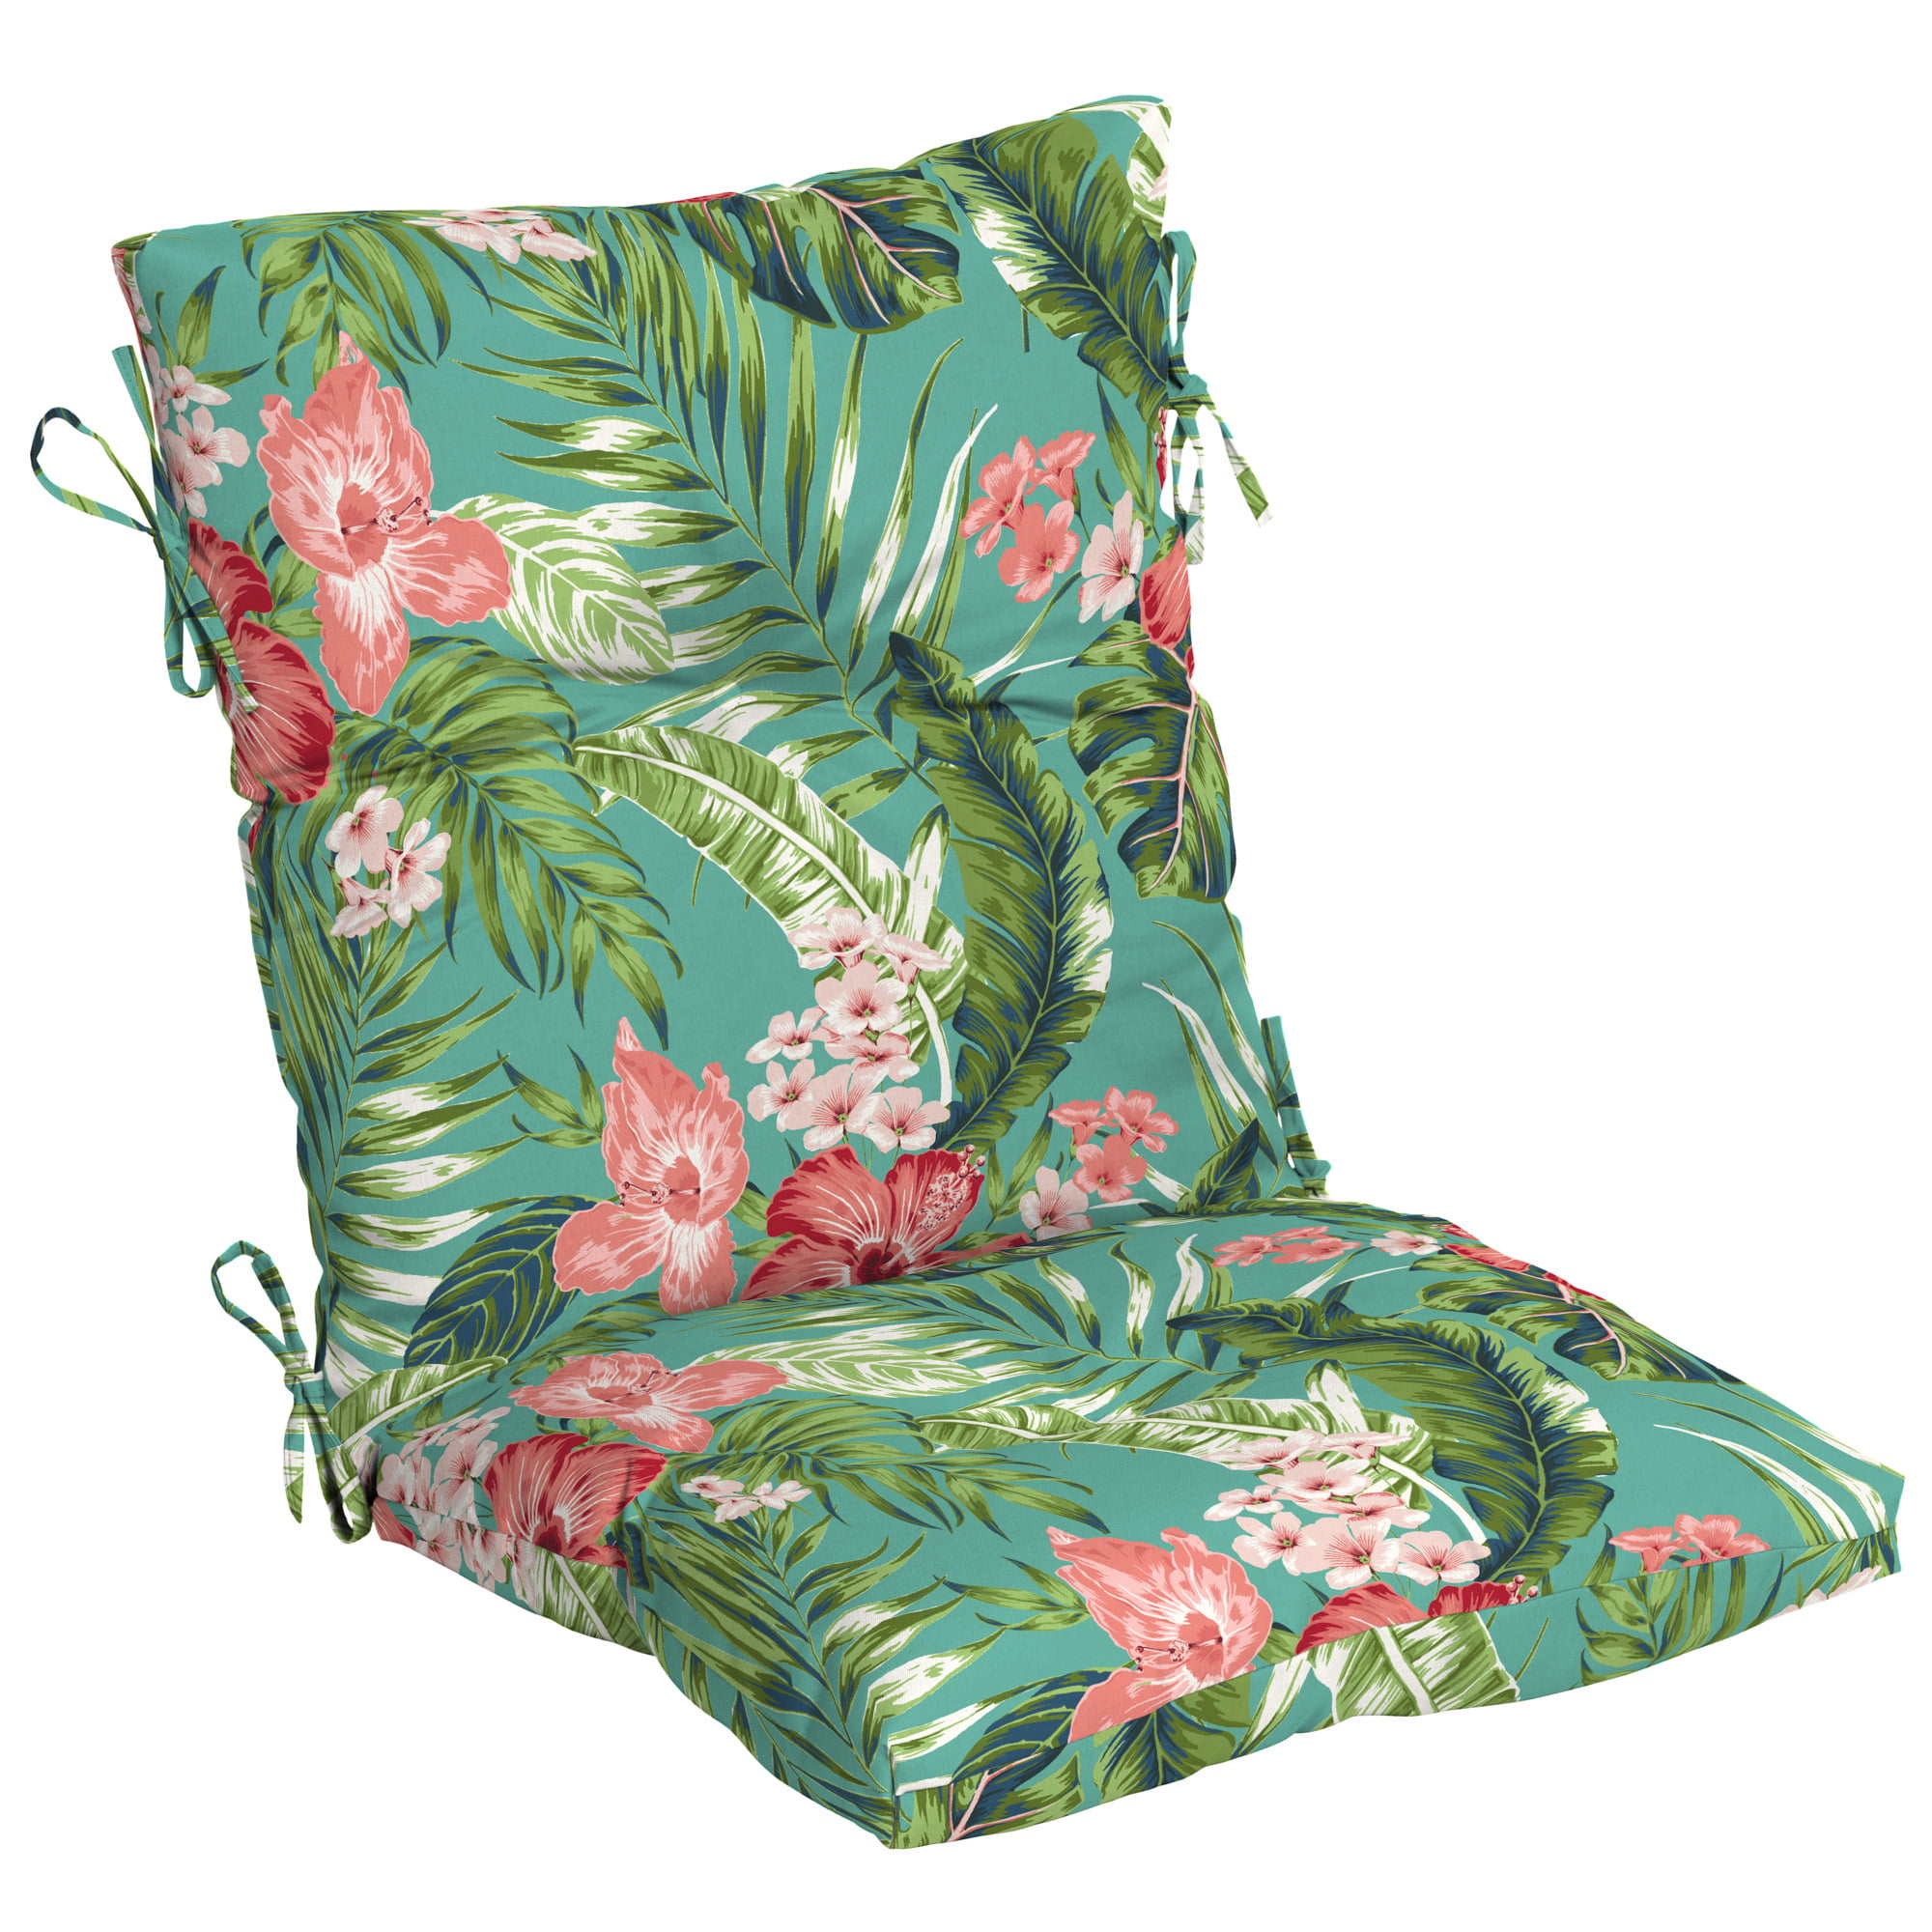 Gardens La Tropical Teal 44, Better Homes And Gardens Outdoor Seat Cushion